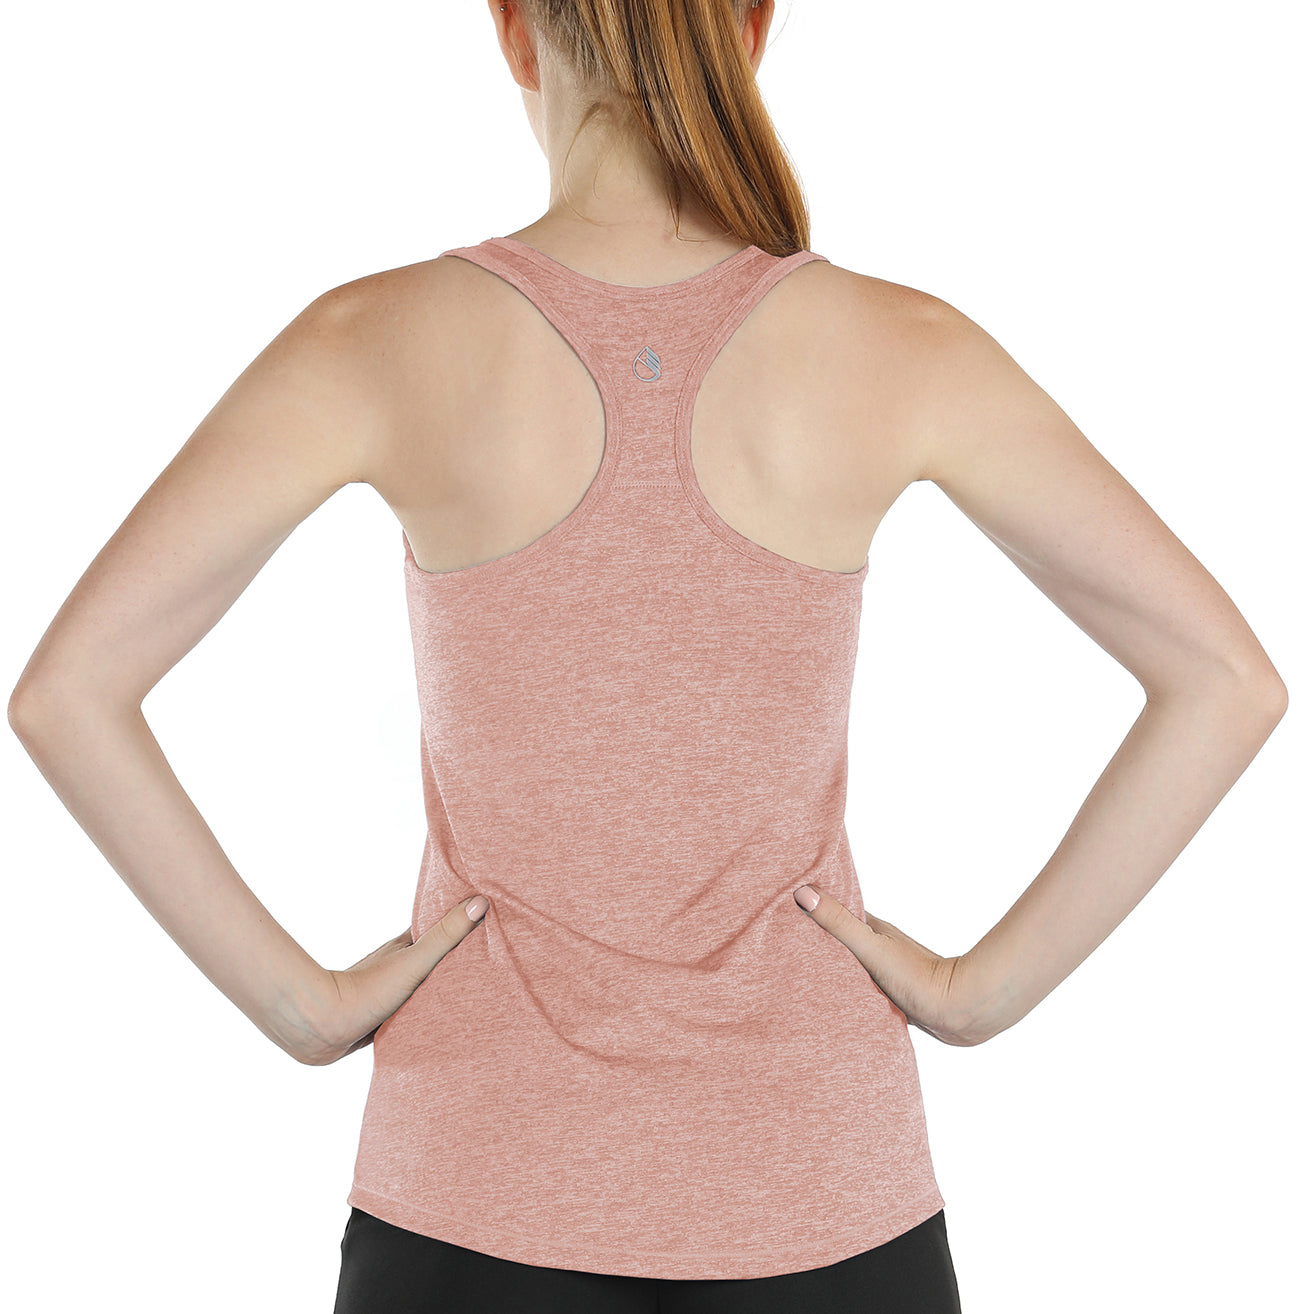 icyzone Workout Tank Tops with Built in Bra - Women's Racerback